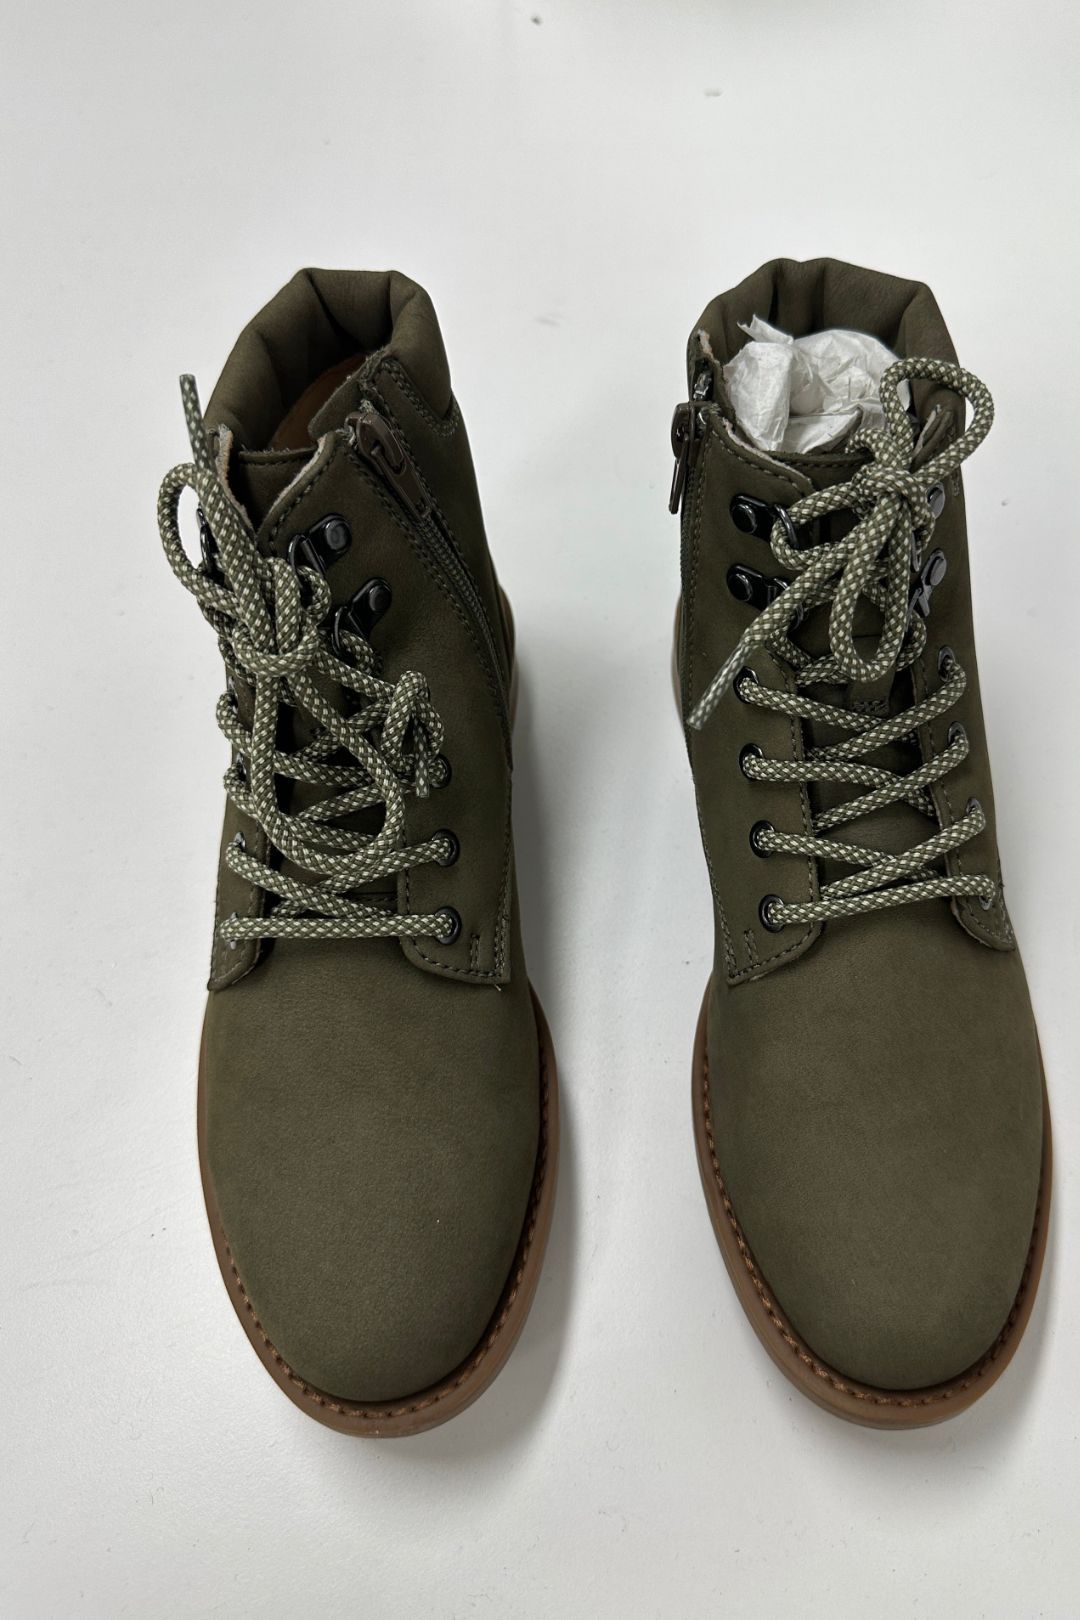 Hush Puppies Lace Up Numbuck Boots in Khaki